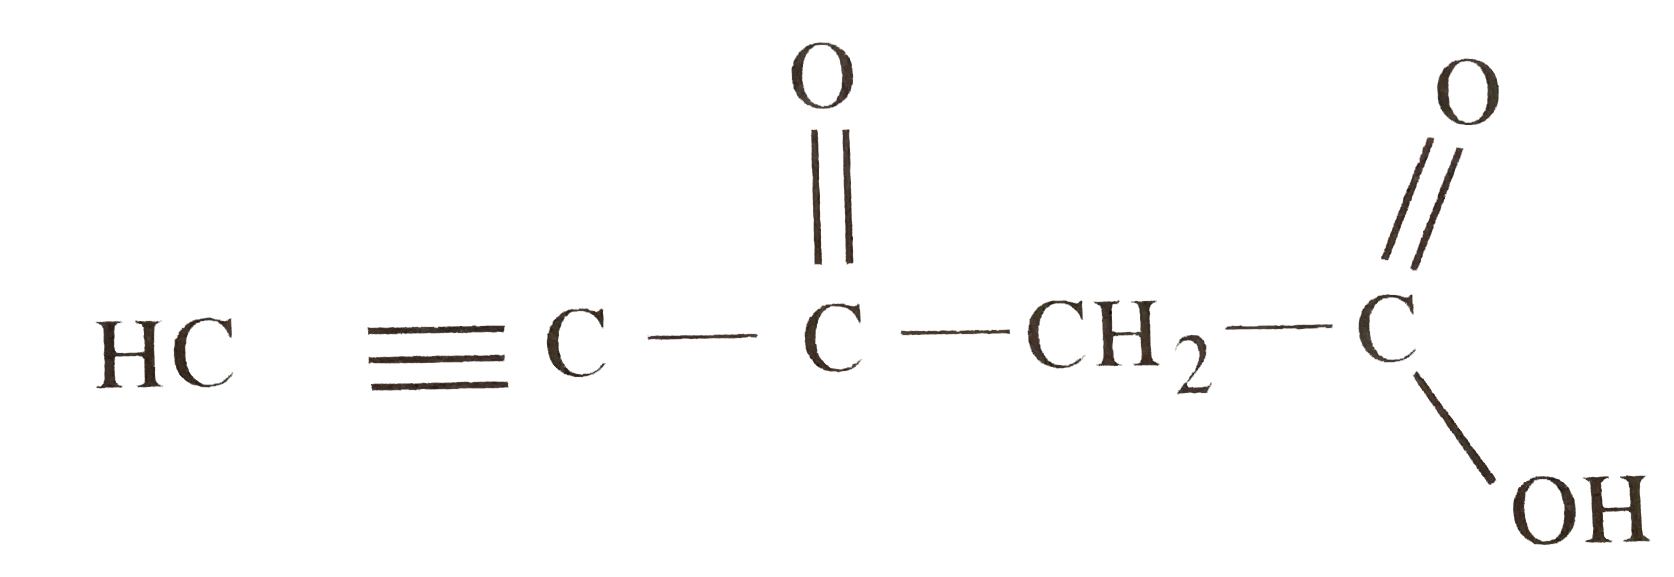 Predict the hybridisation of each carbon in the molecule of organic compound given below. Also indicate the total number of sigma and pi bonds in this molecule.